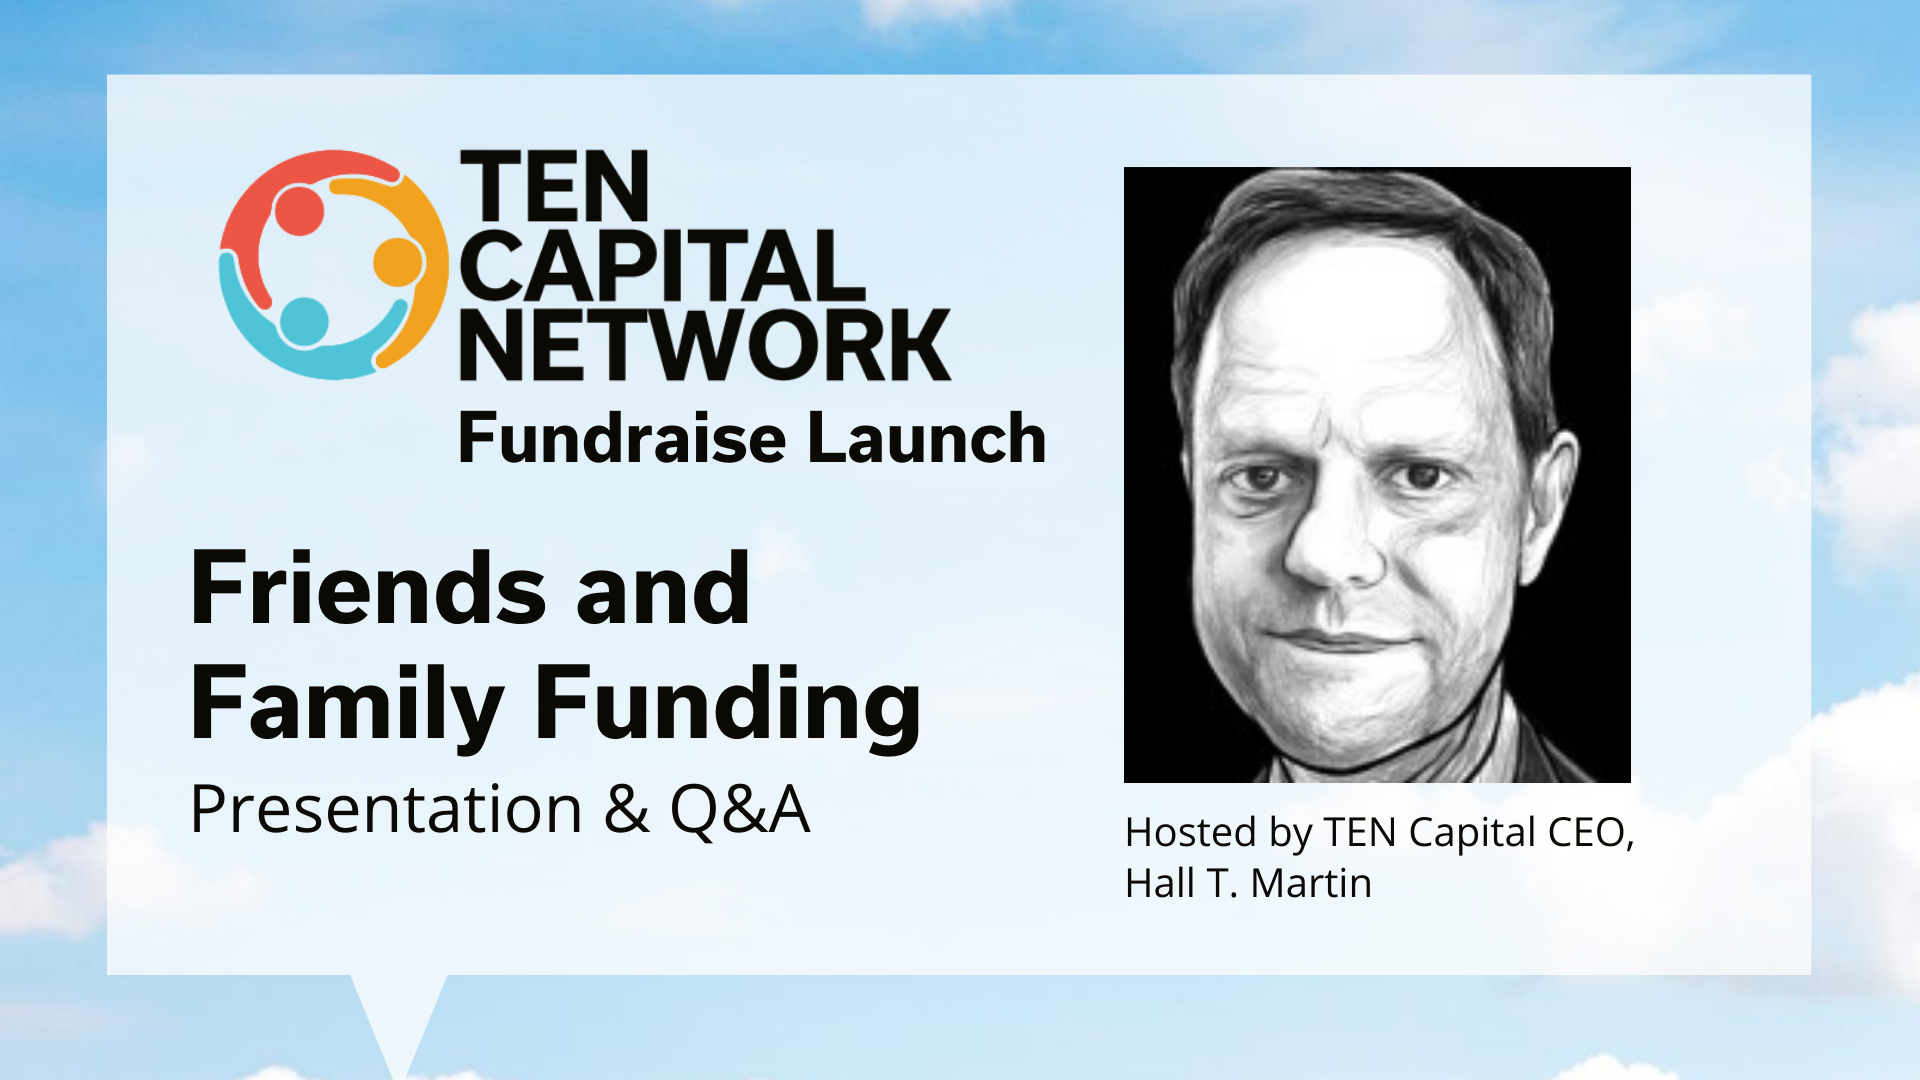 TEN Capital Fundraise Launch Program: Friends and Family Funding Q&A